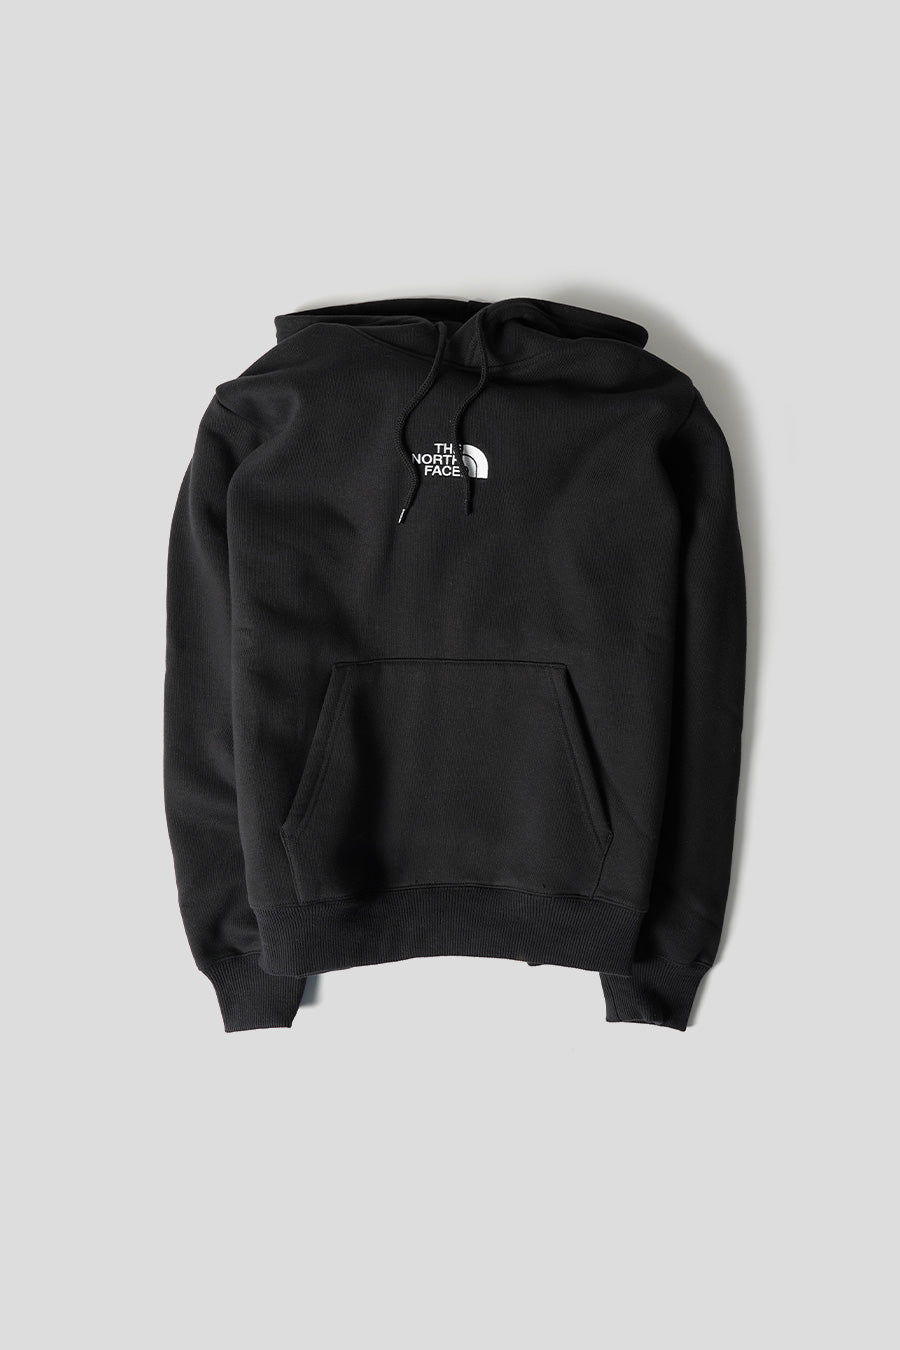 The North Face - BLACK AND WHITE LOGO HOODIE - LE LABO STORE